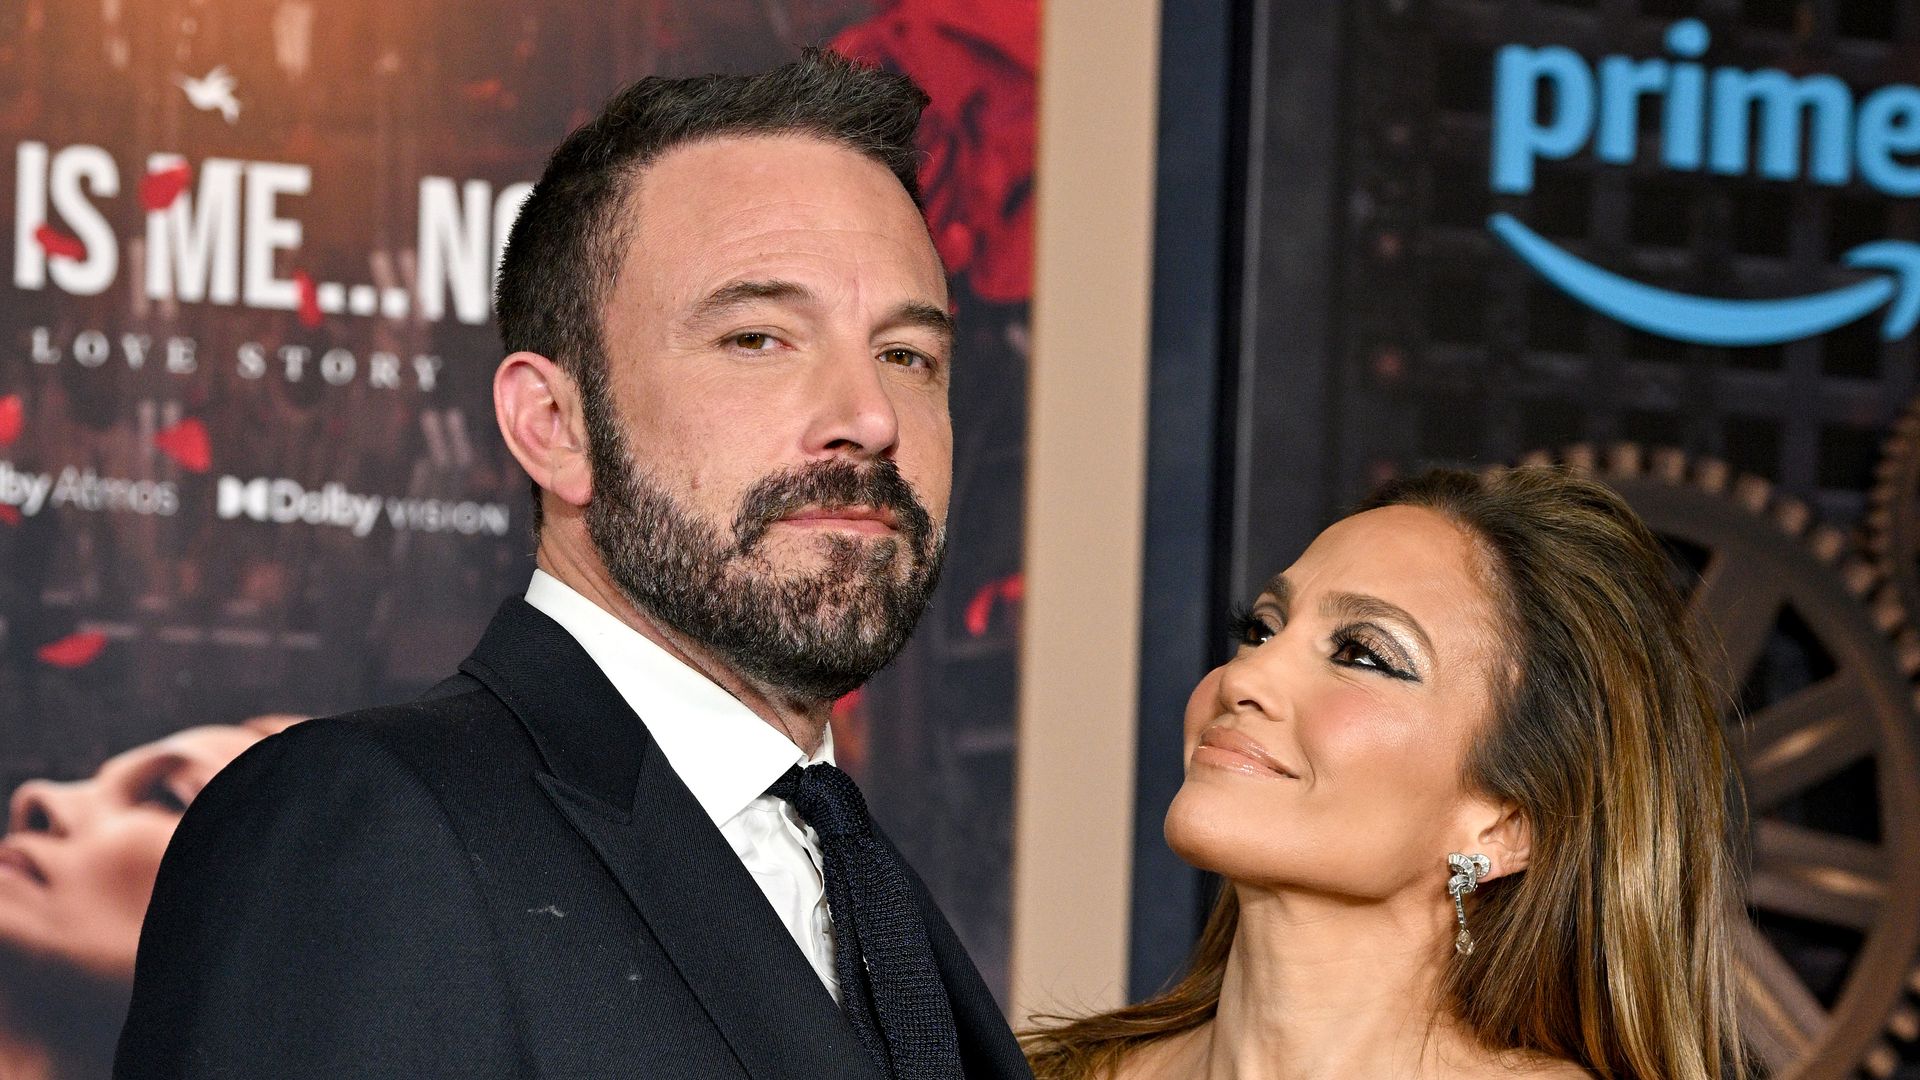 Jennifer Lopez says she's 'tried' to be 'home more' amid Ben Affleck split rumors